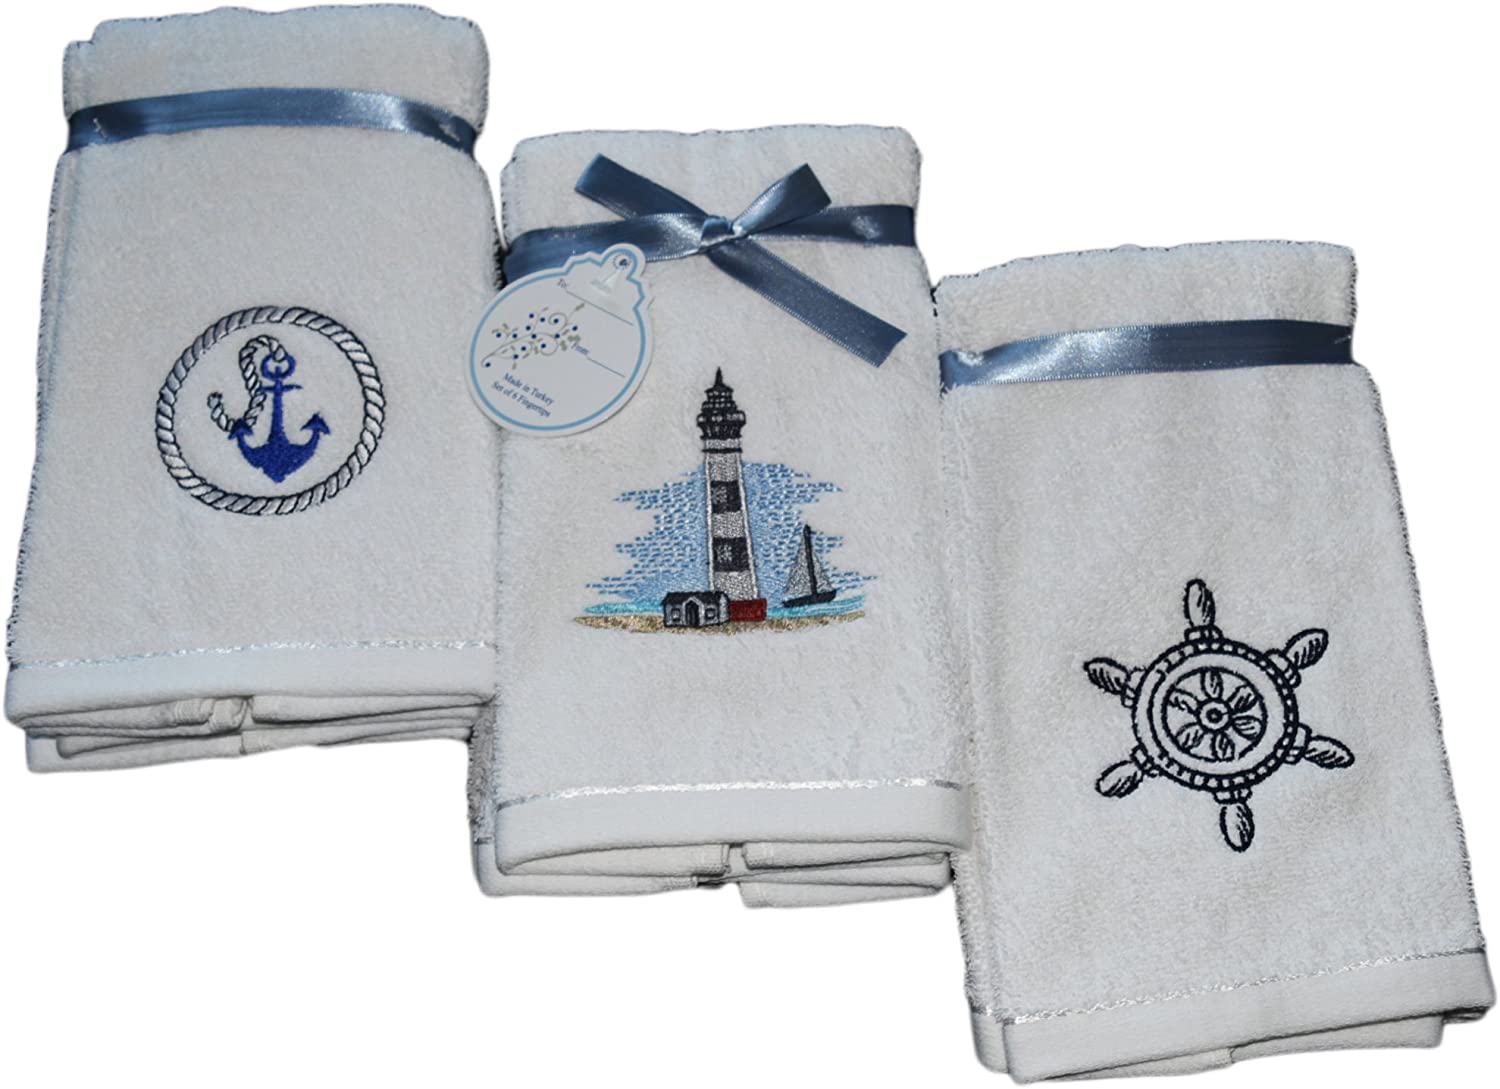 Embroidered Turkish Cotton Fingertip Towels - 6 Pieces - Classic Turkish Towels